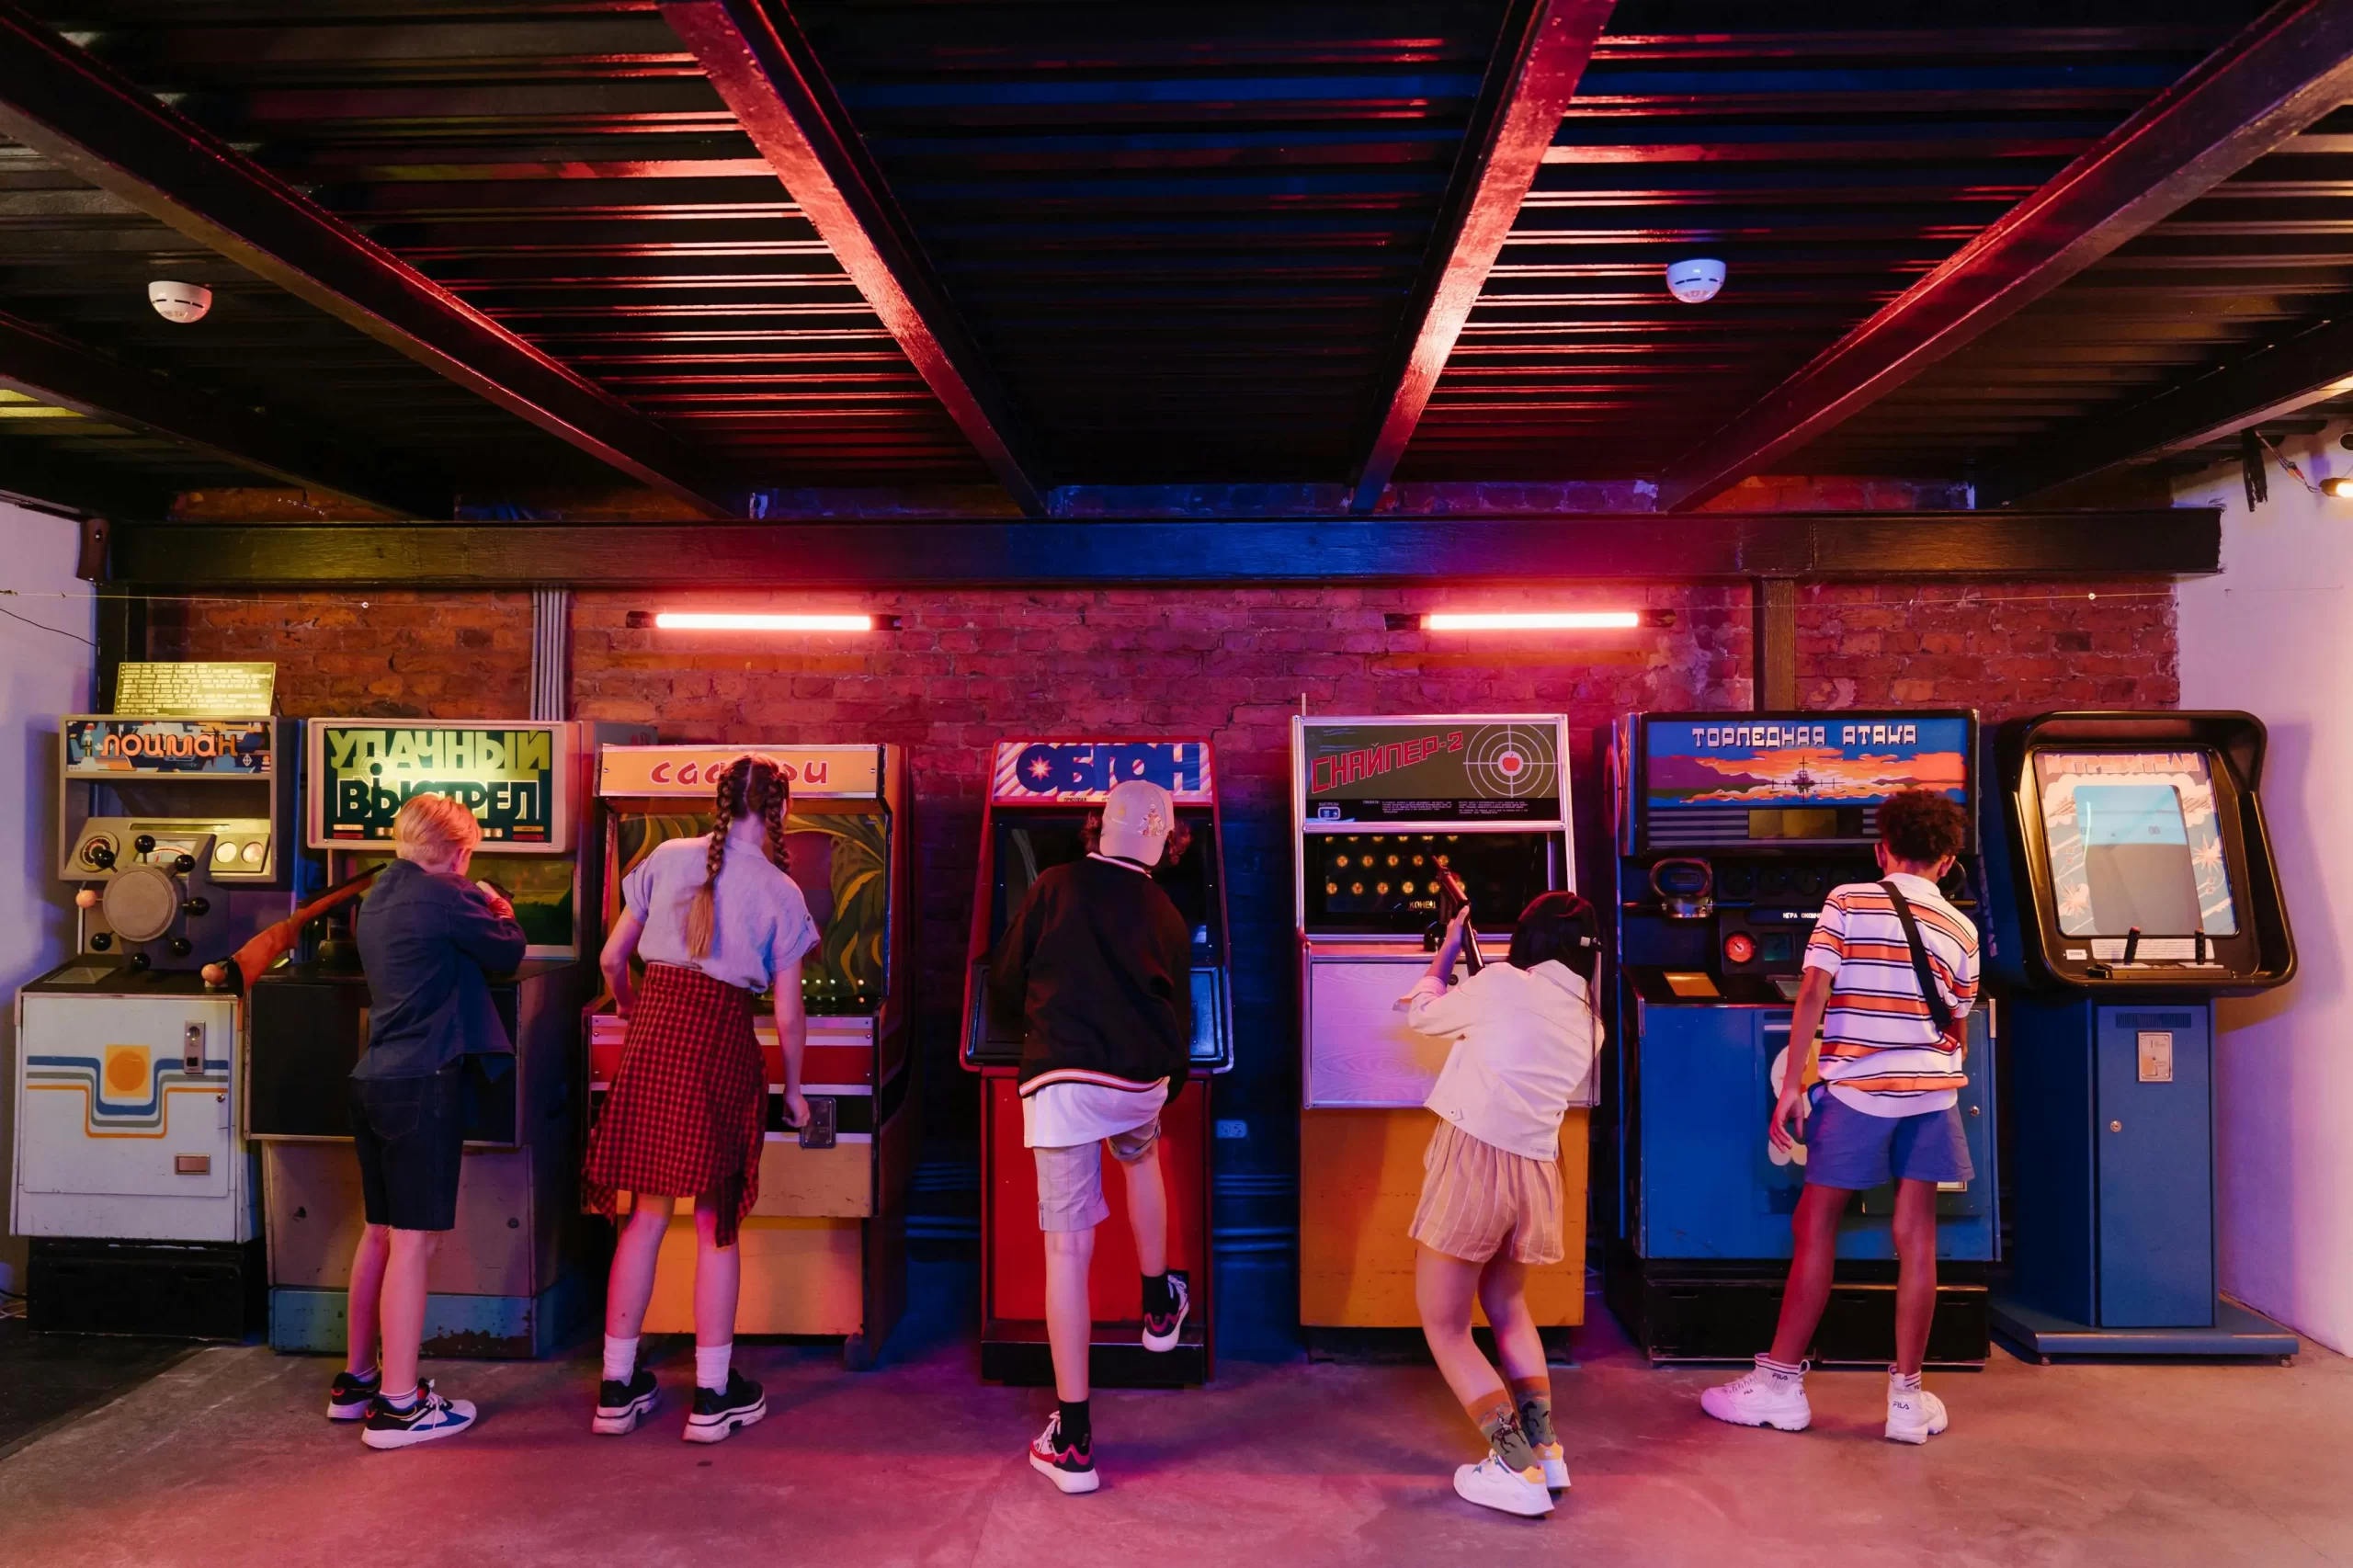 The Benefits of Adding Arcade Games to Your Bar or Restaurant